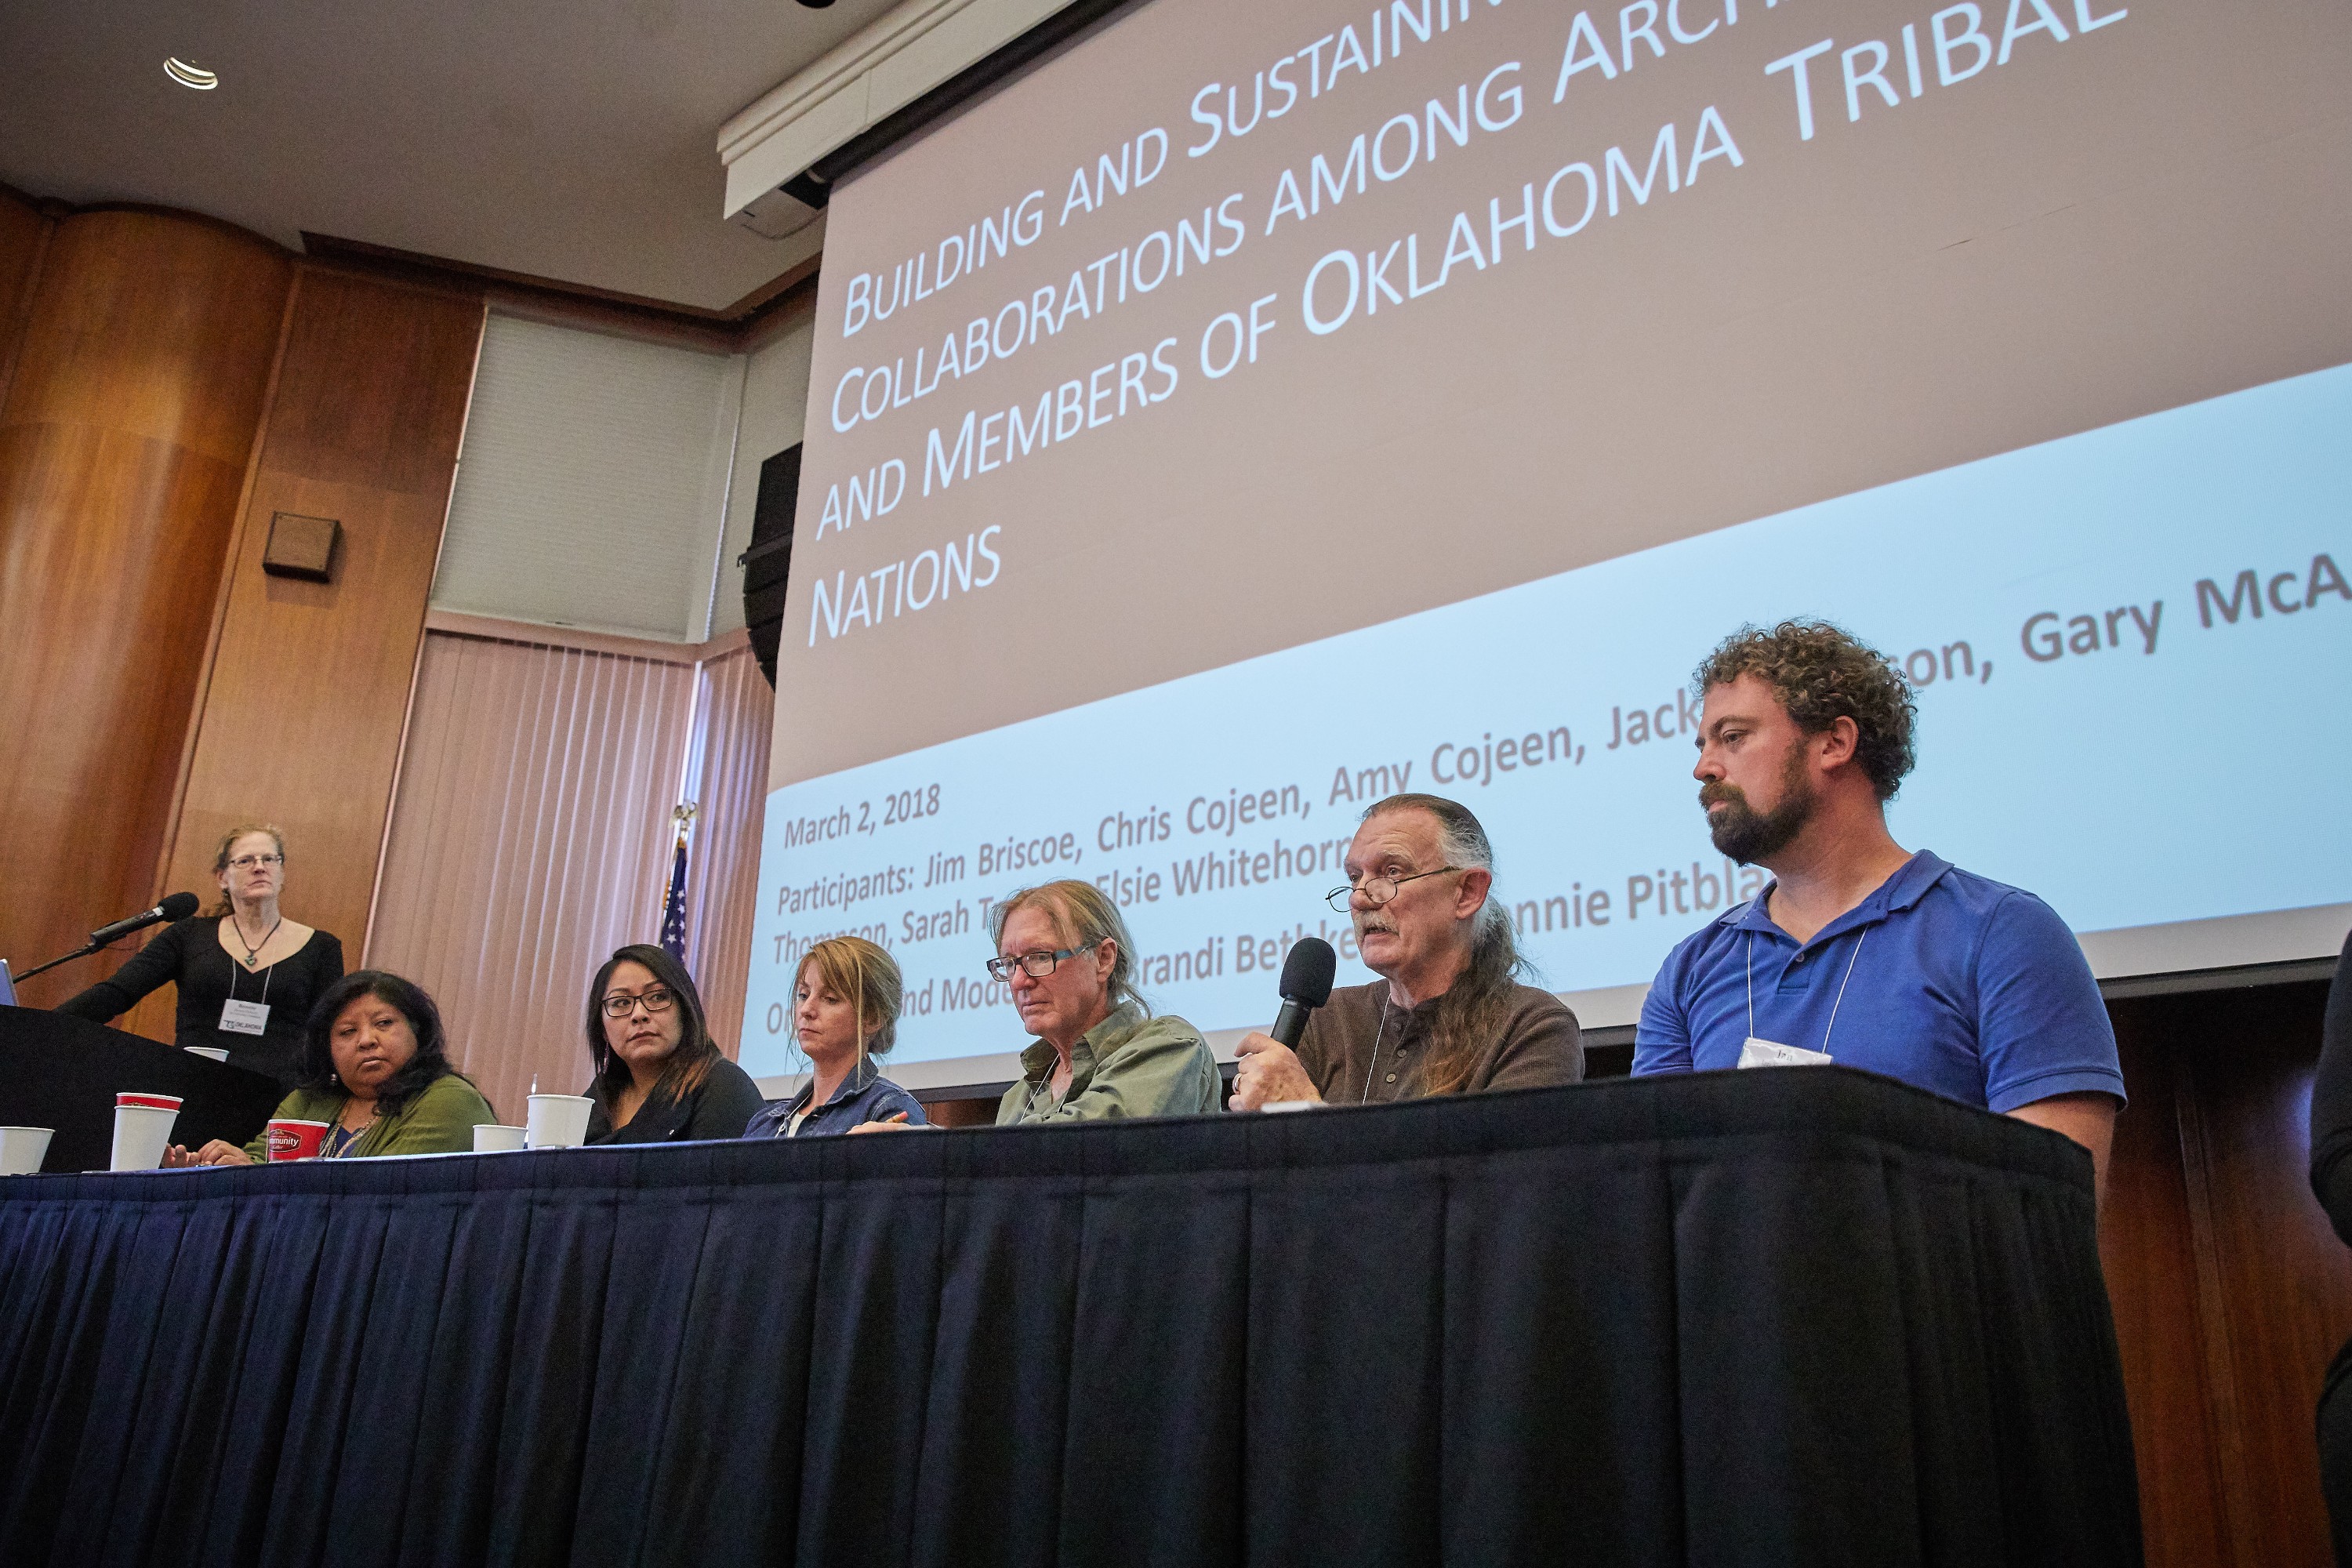 Representatives of Oklahoma's archaeological community participate in the first collaboration forum in 2018.